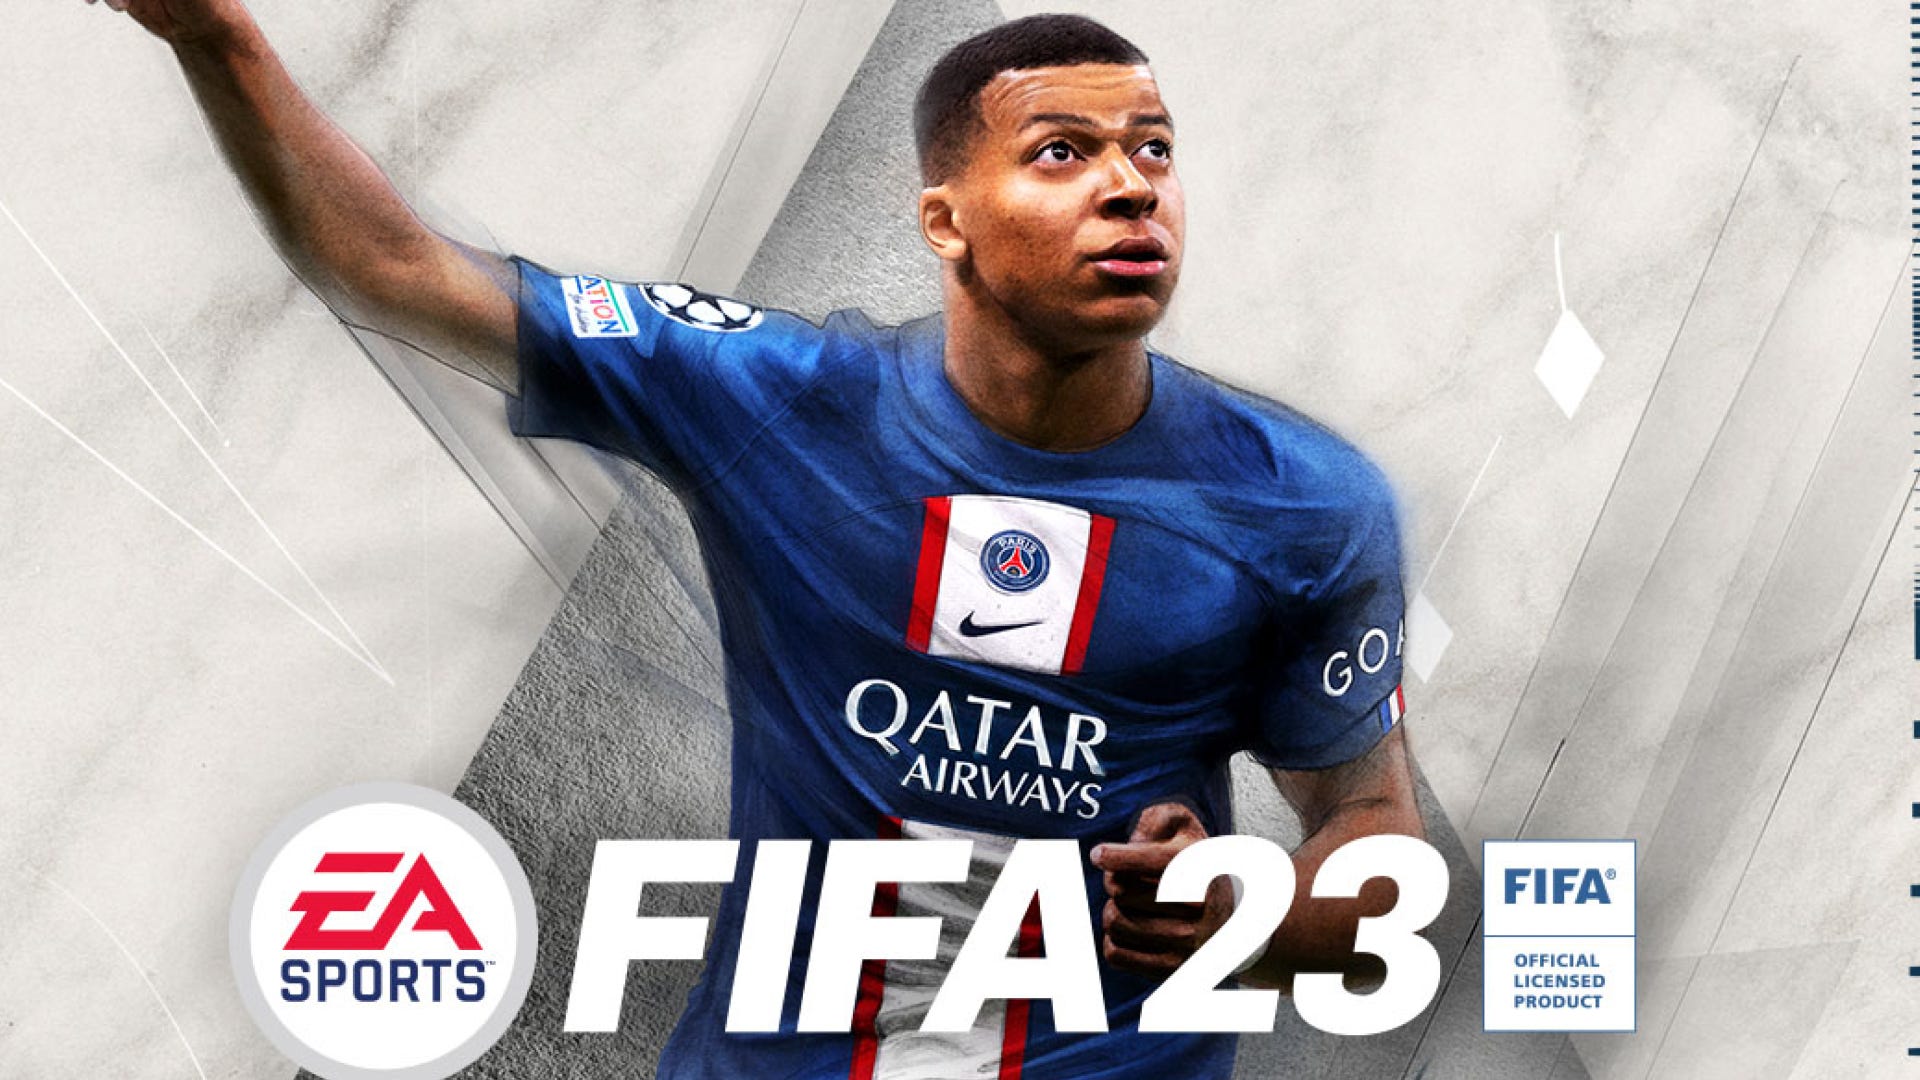 How To Download FIFA 23 On PC - Full Guide 